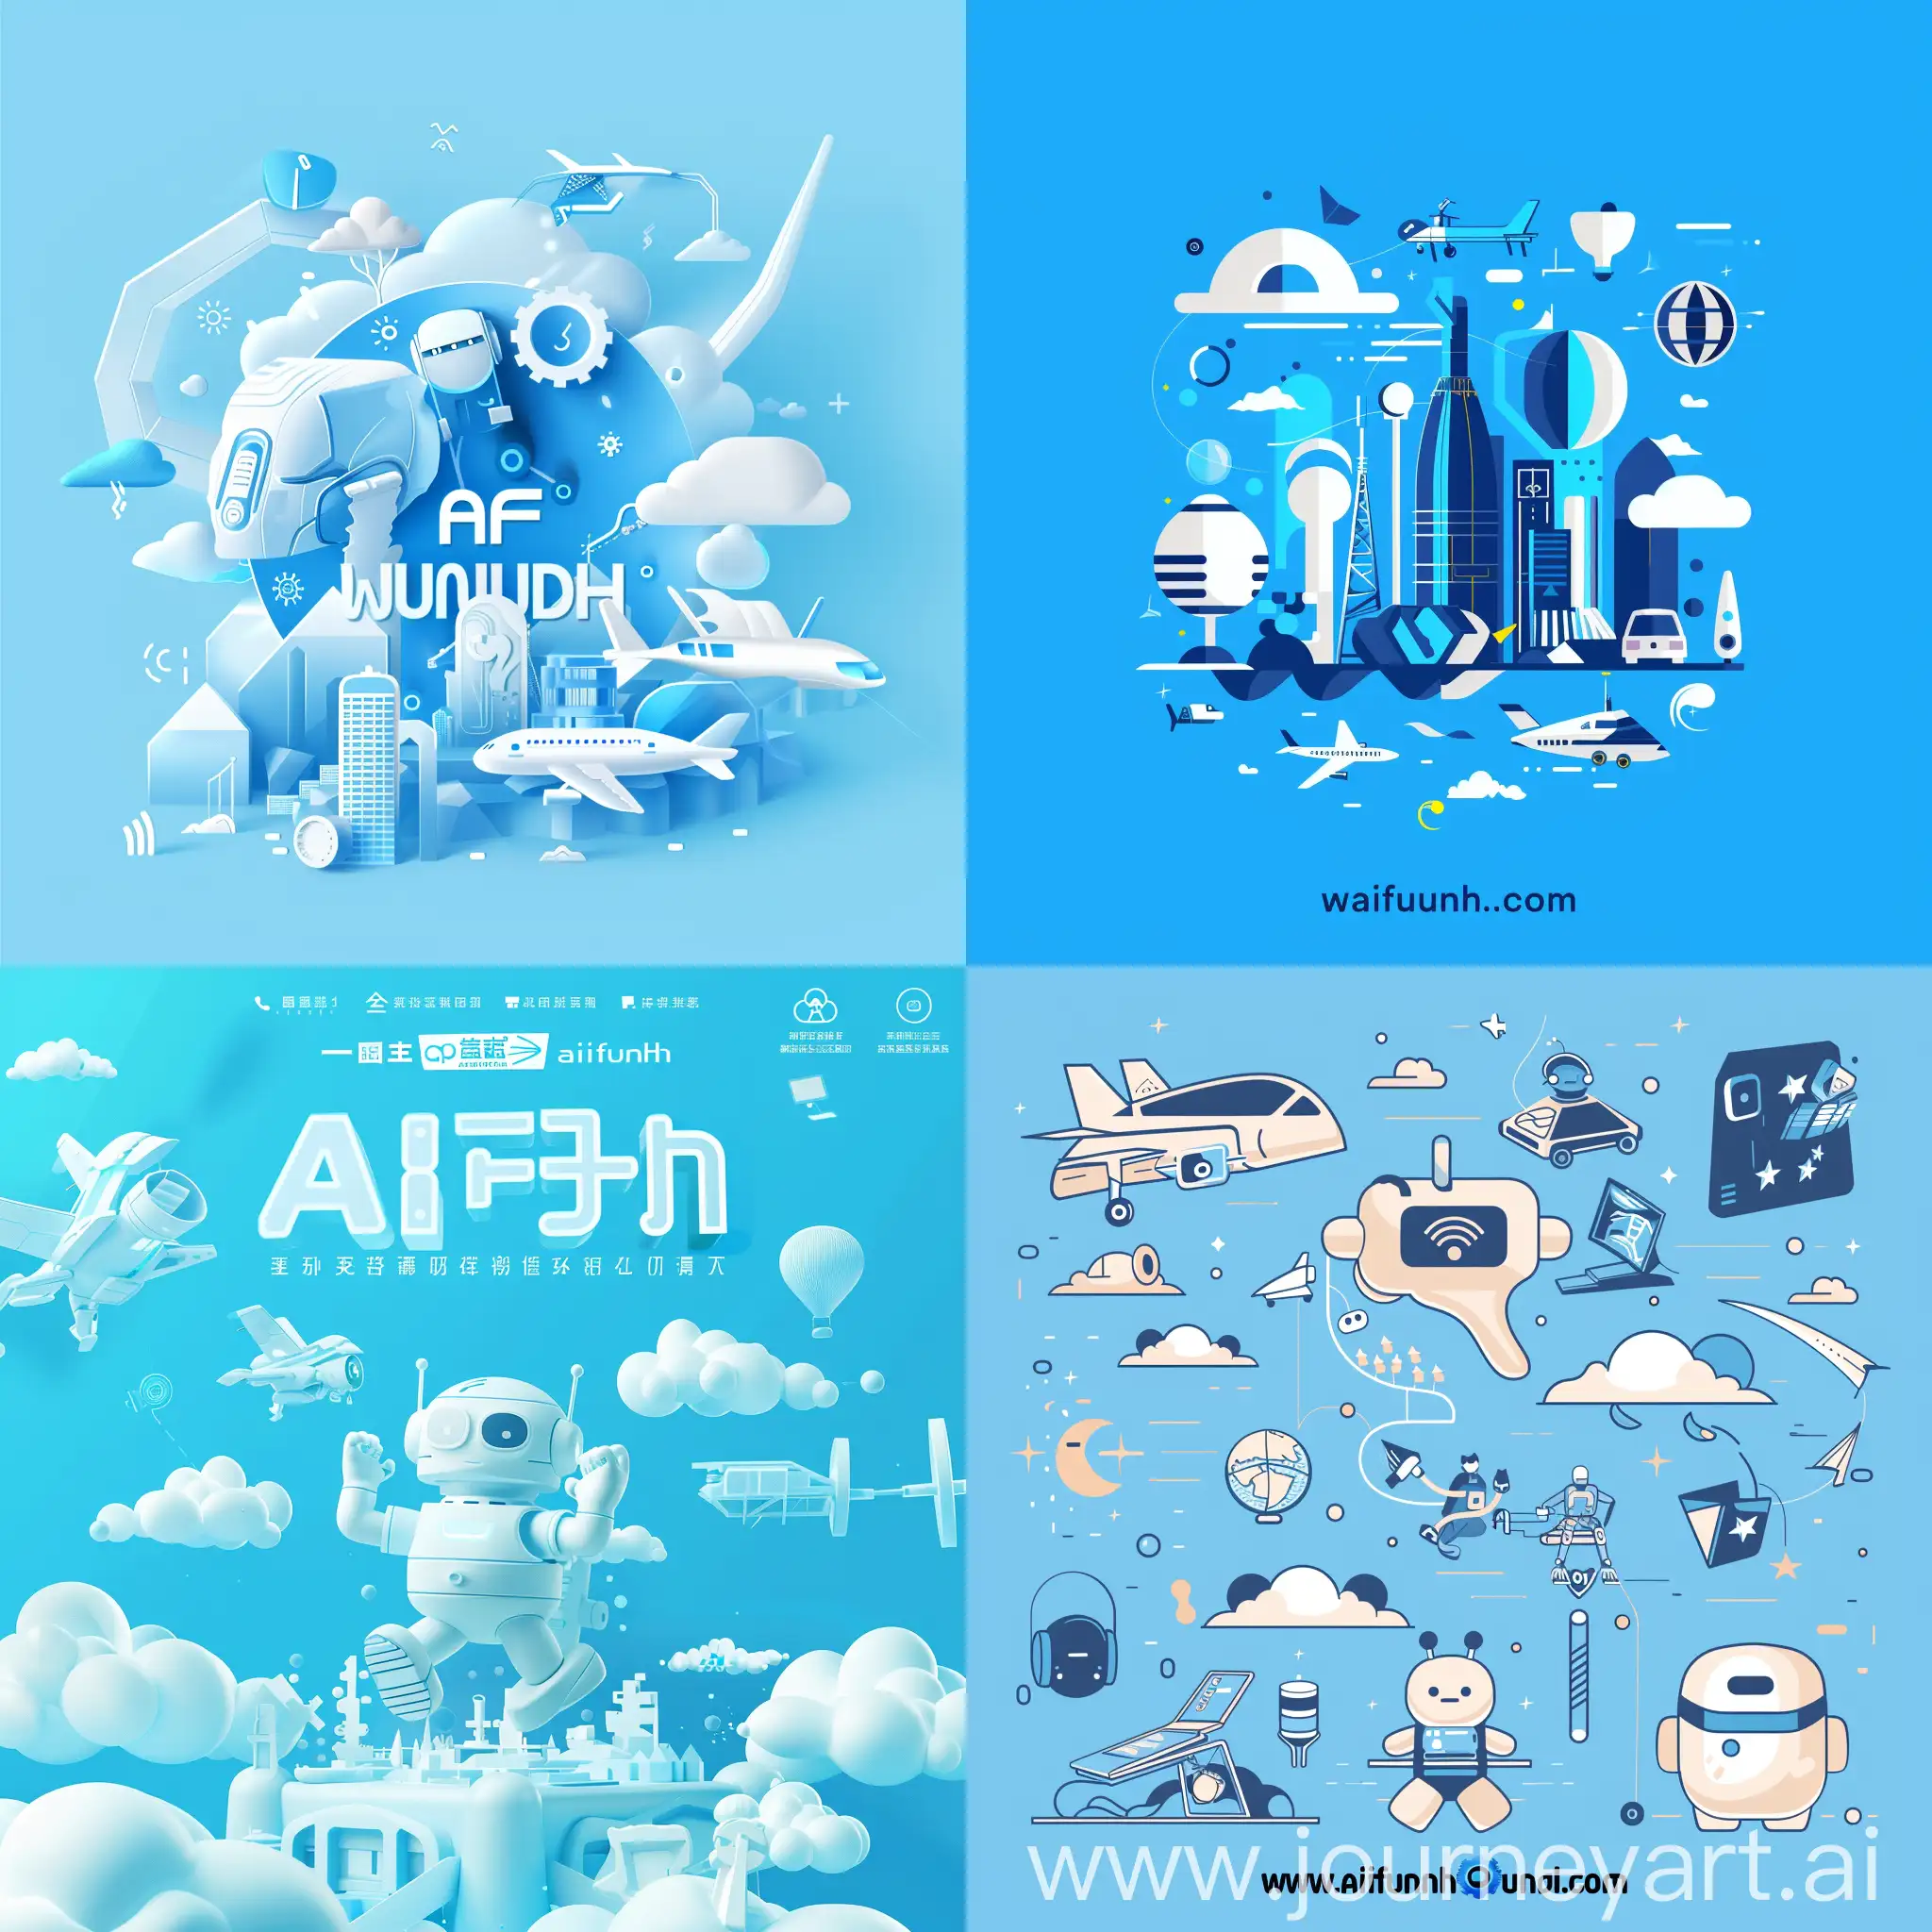 Modern-Sky-Blue-AI-and-Entertainment-Navigation-Website-Icon